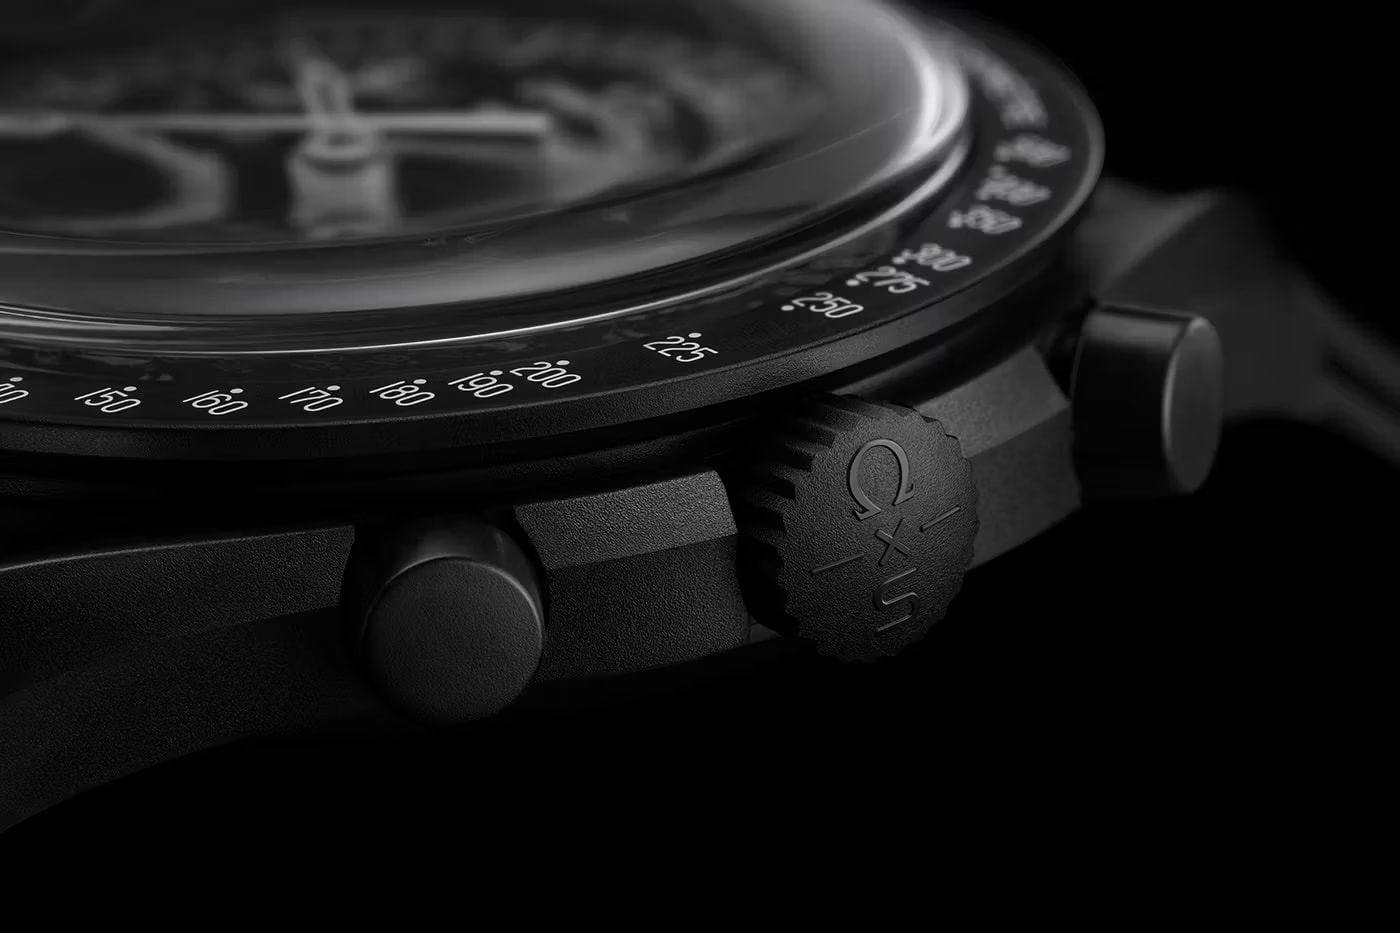 OMEGA x Swatch 最新 Bioceramic MoonSwatch 新作「MISSION TO THE MOONPHASE」正式登場